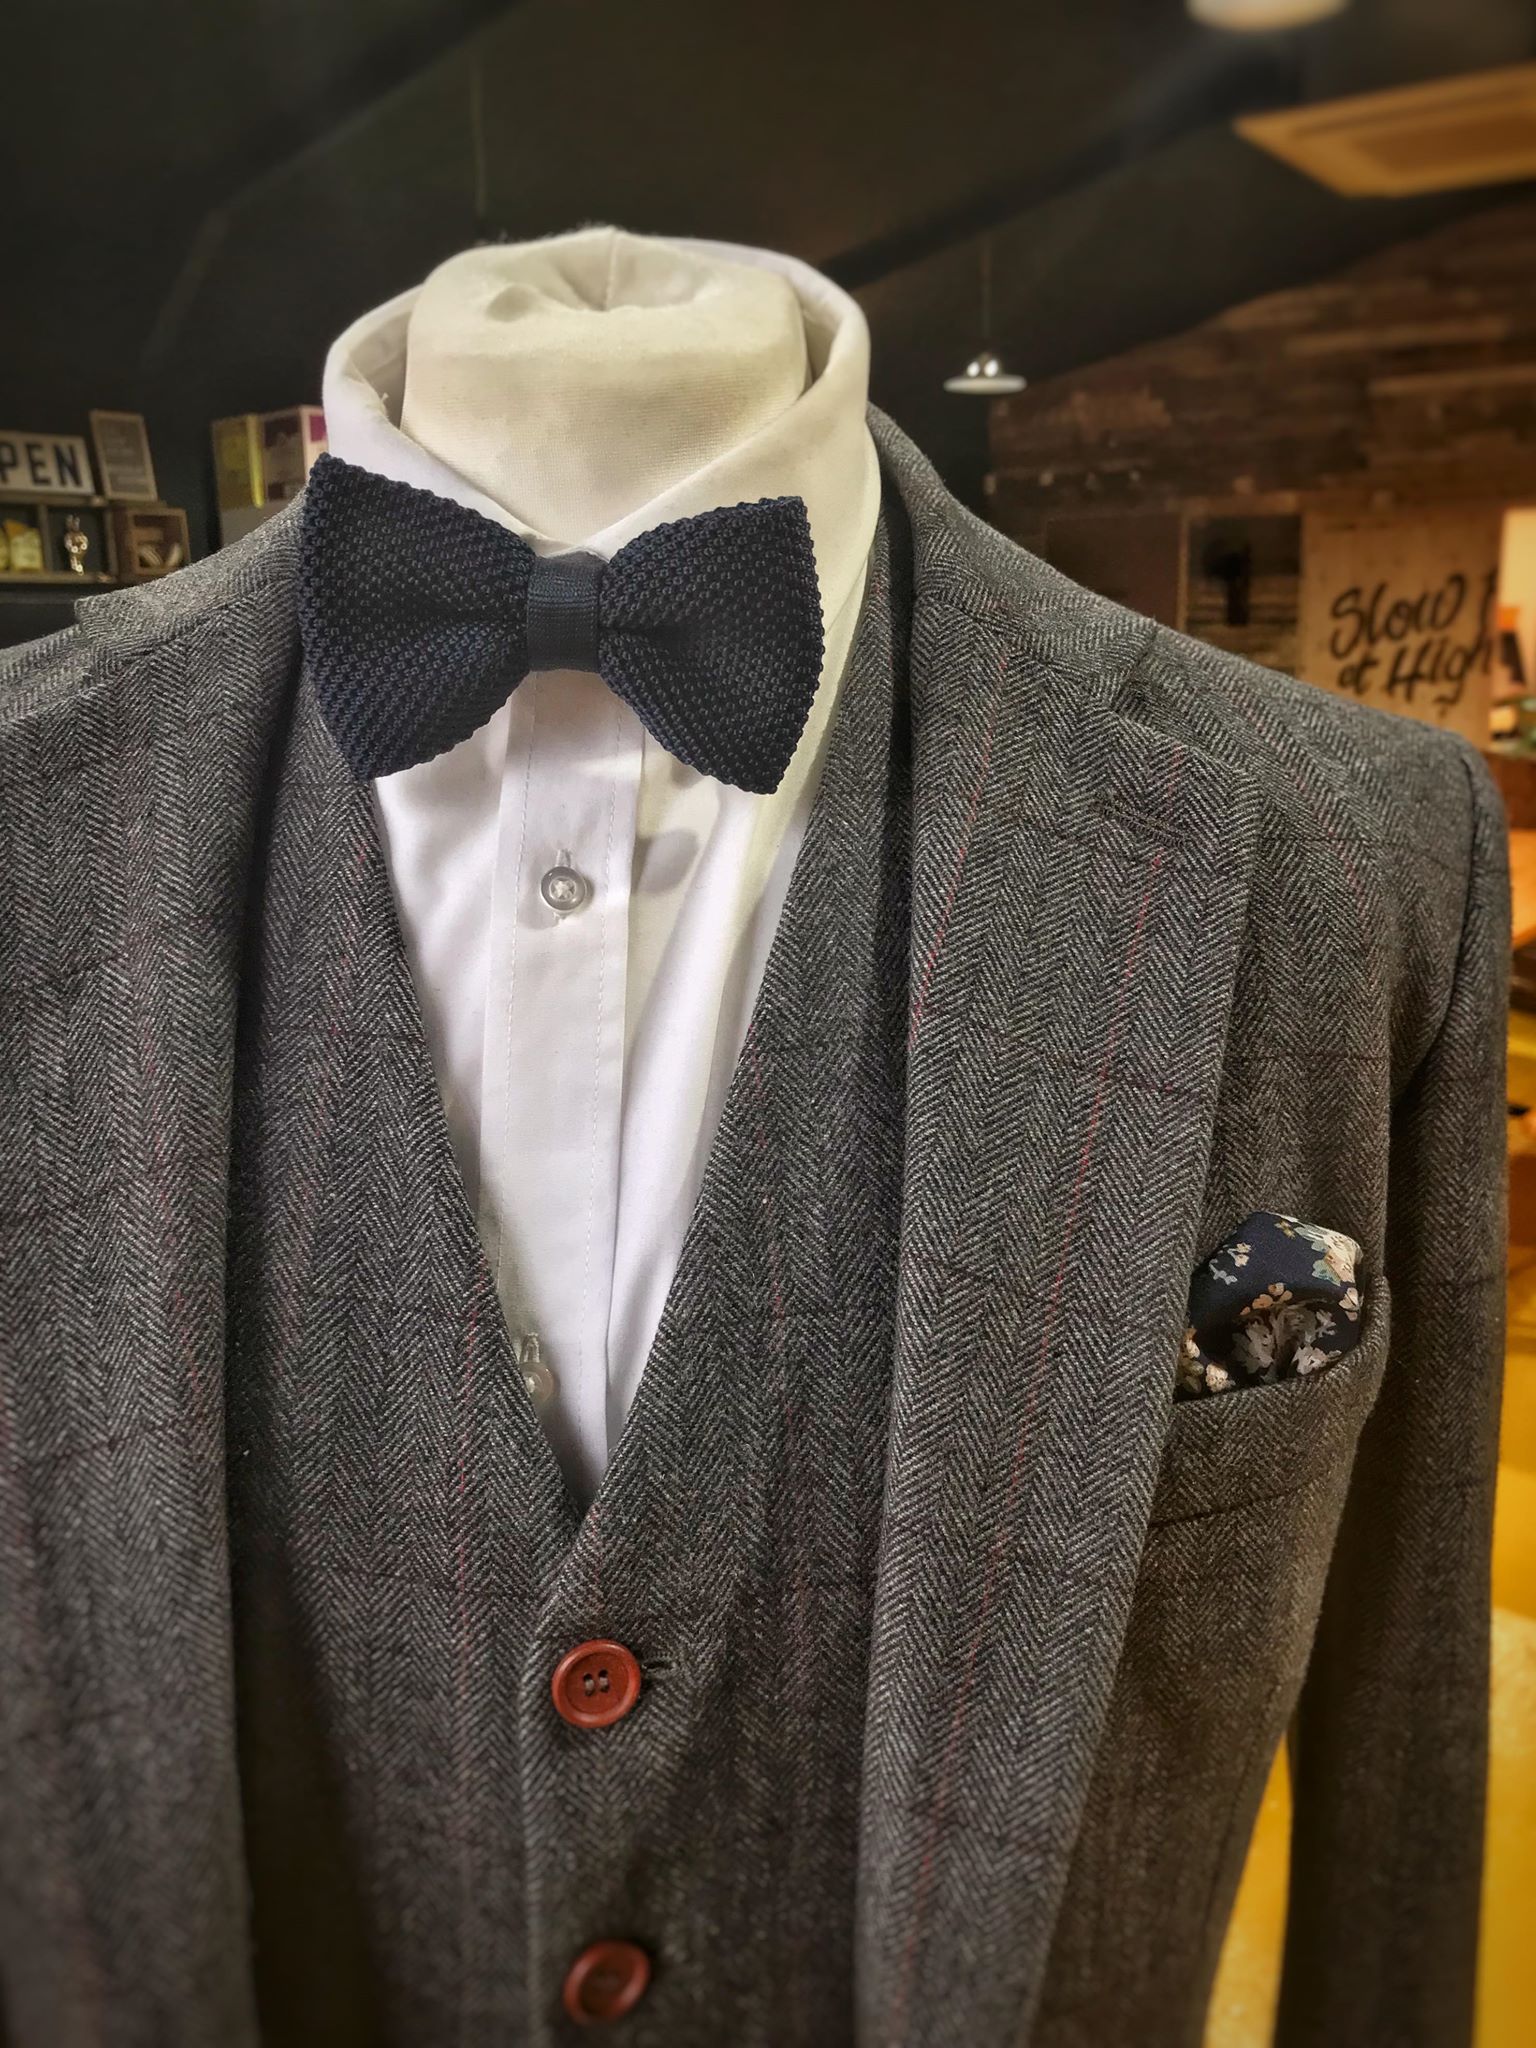 Can a Bow Tie Be Worn with a Normal Suit? | OTAA